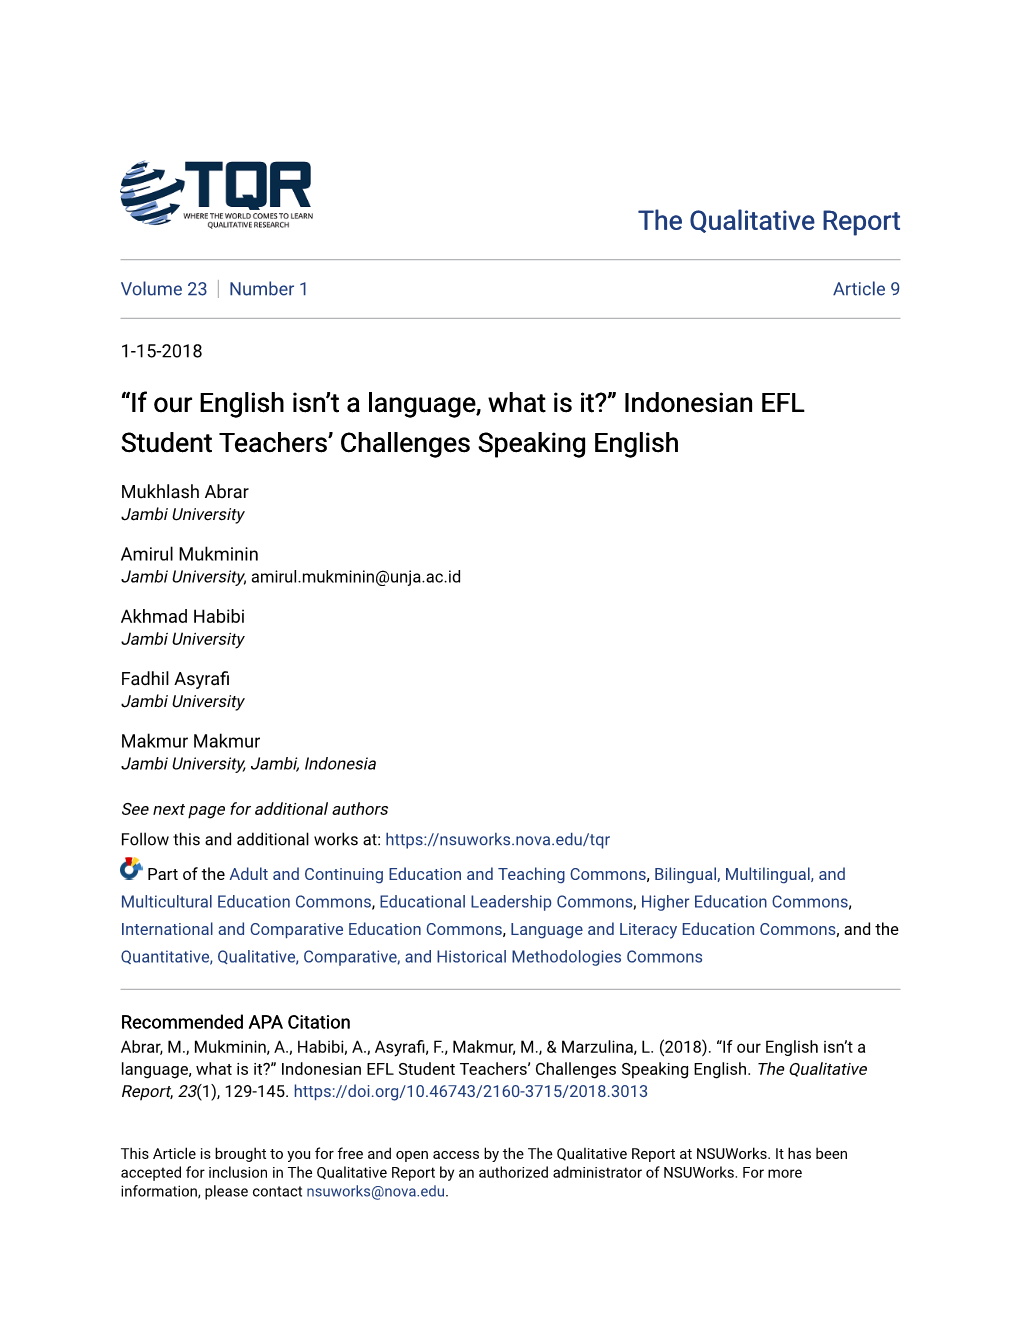 “If Our English Isn't a Language, What Is It?” Indonesian EFL Student Teachers' Challenges Speaking English